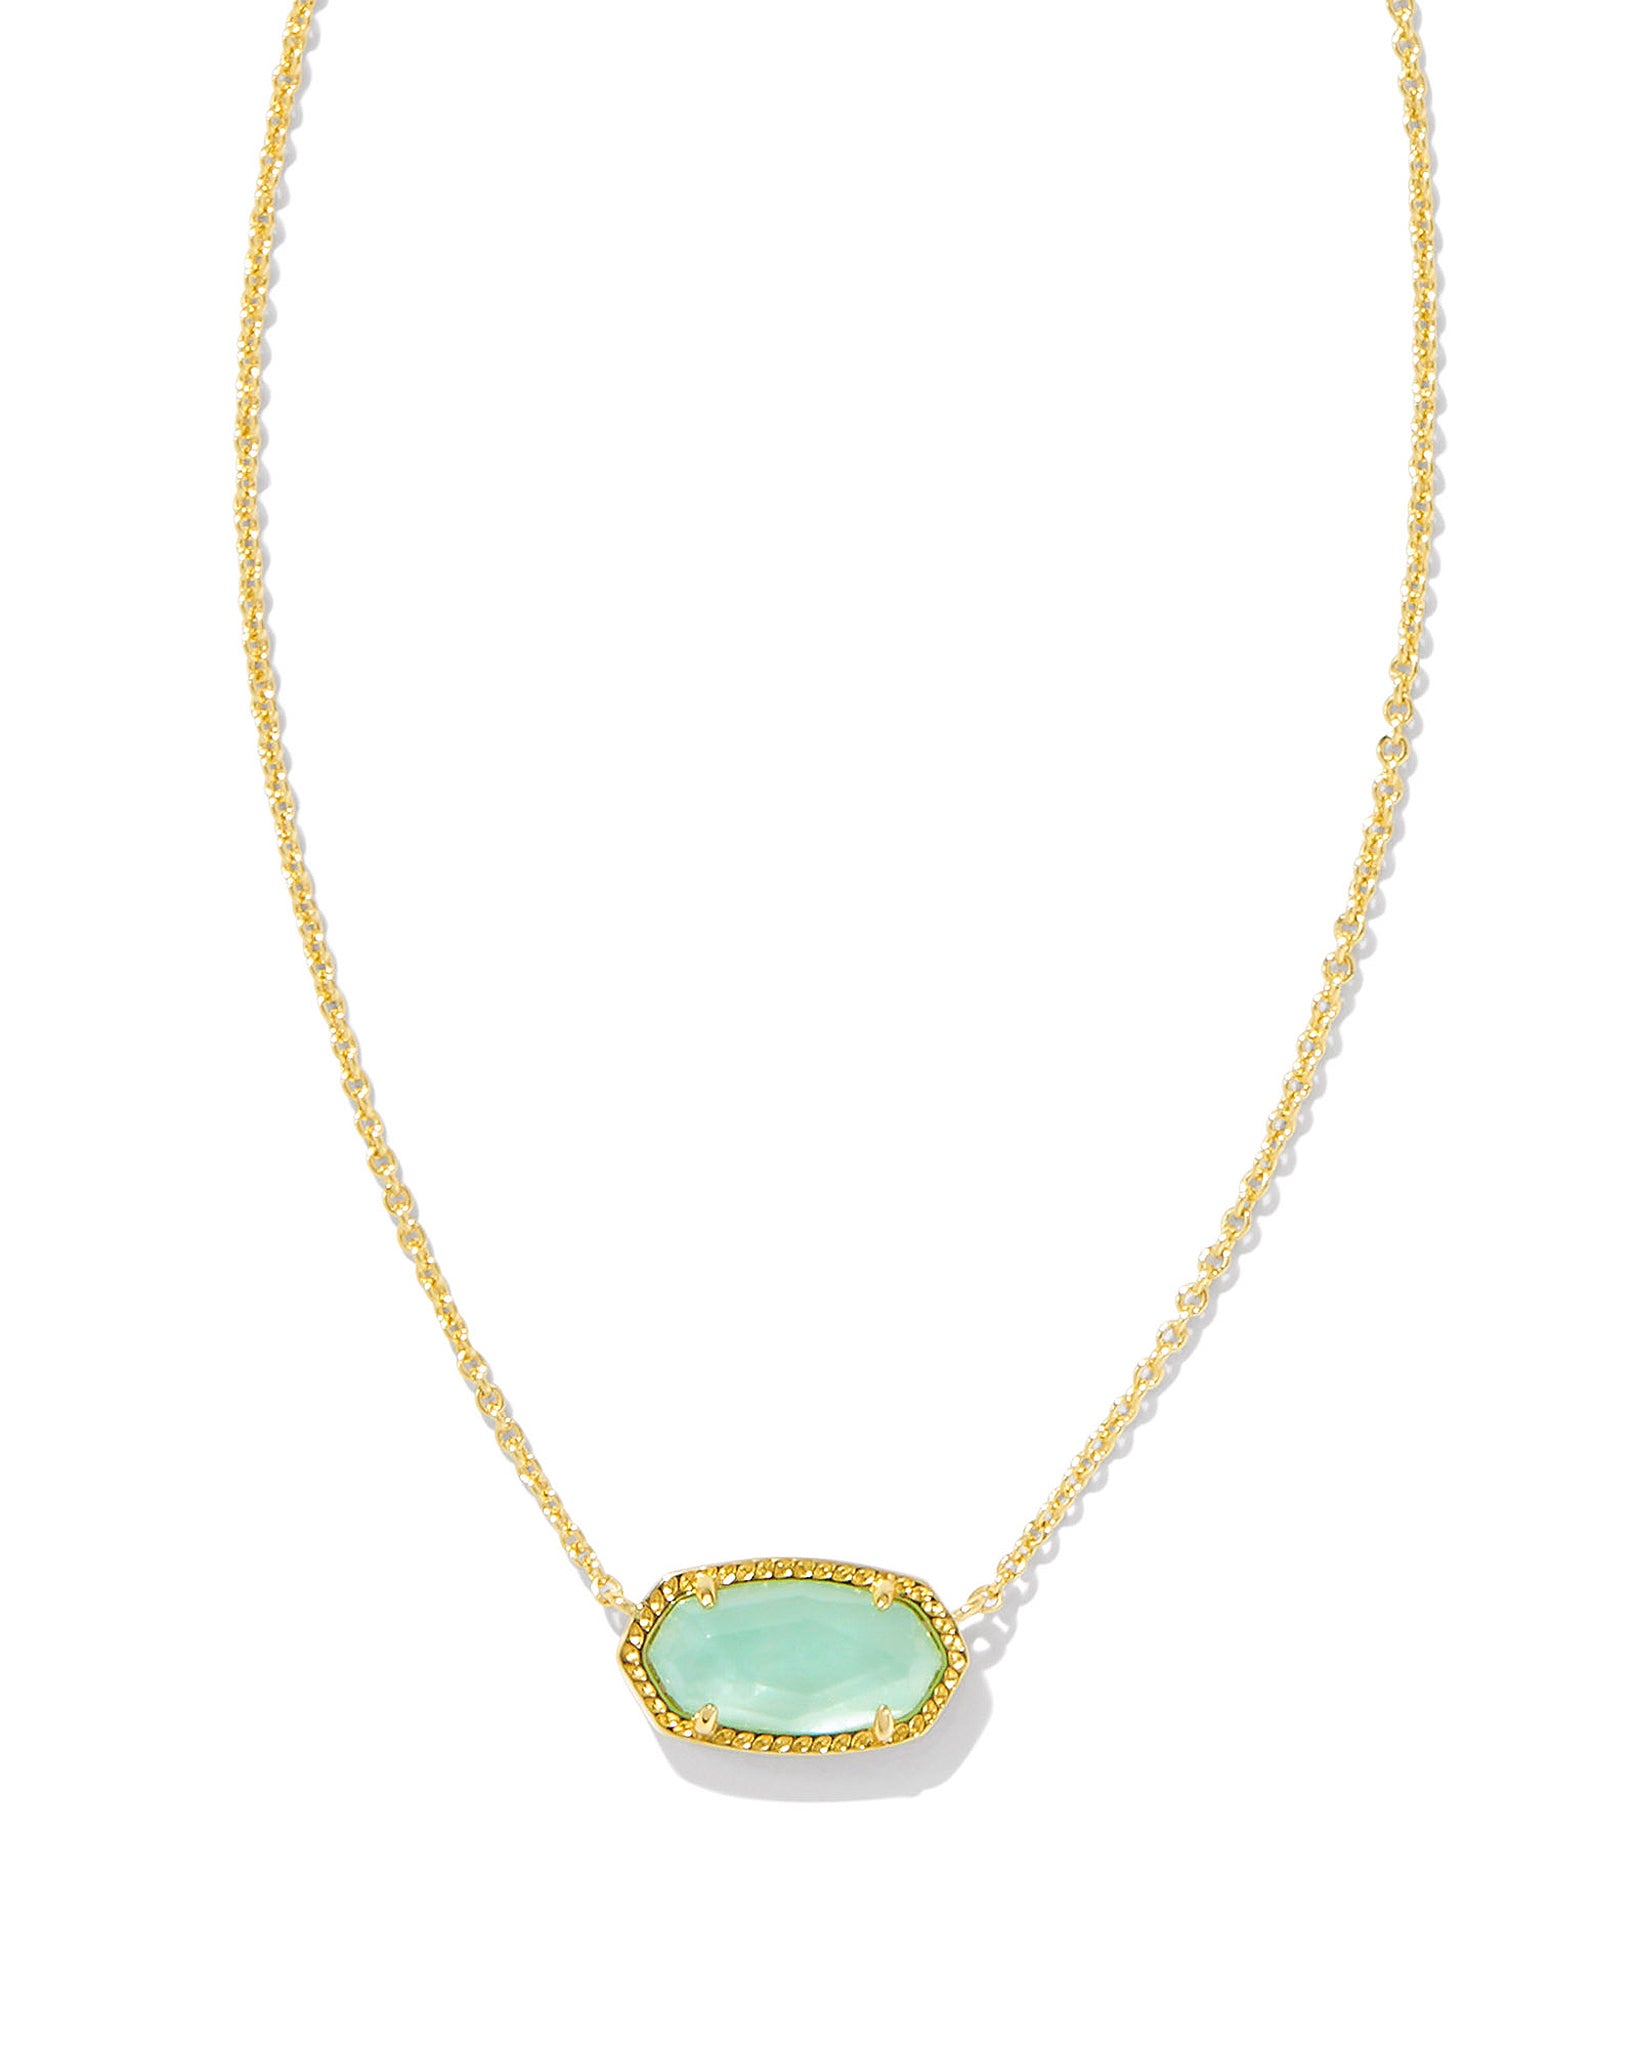 Kendra Scott Elisa Oval Pendant Necklace in Light Green Mother of Pearl and Gold